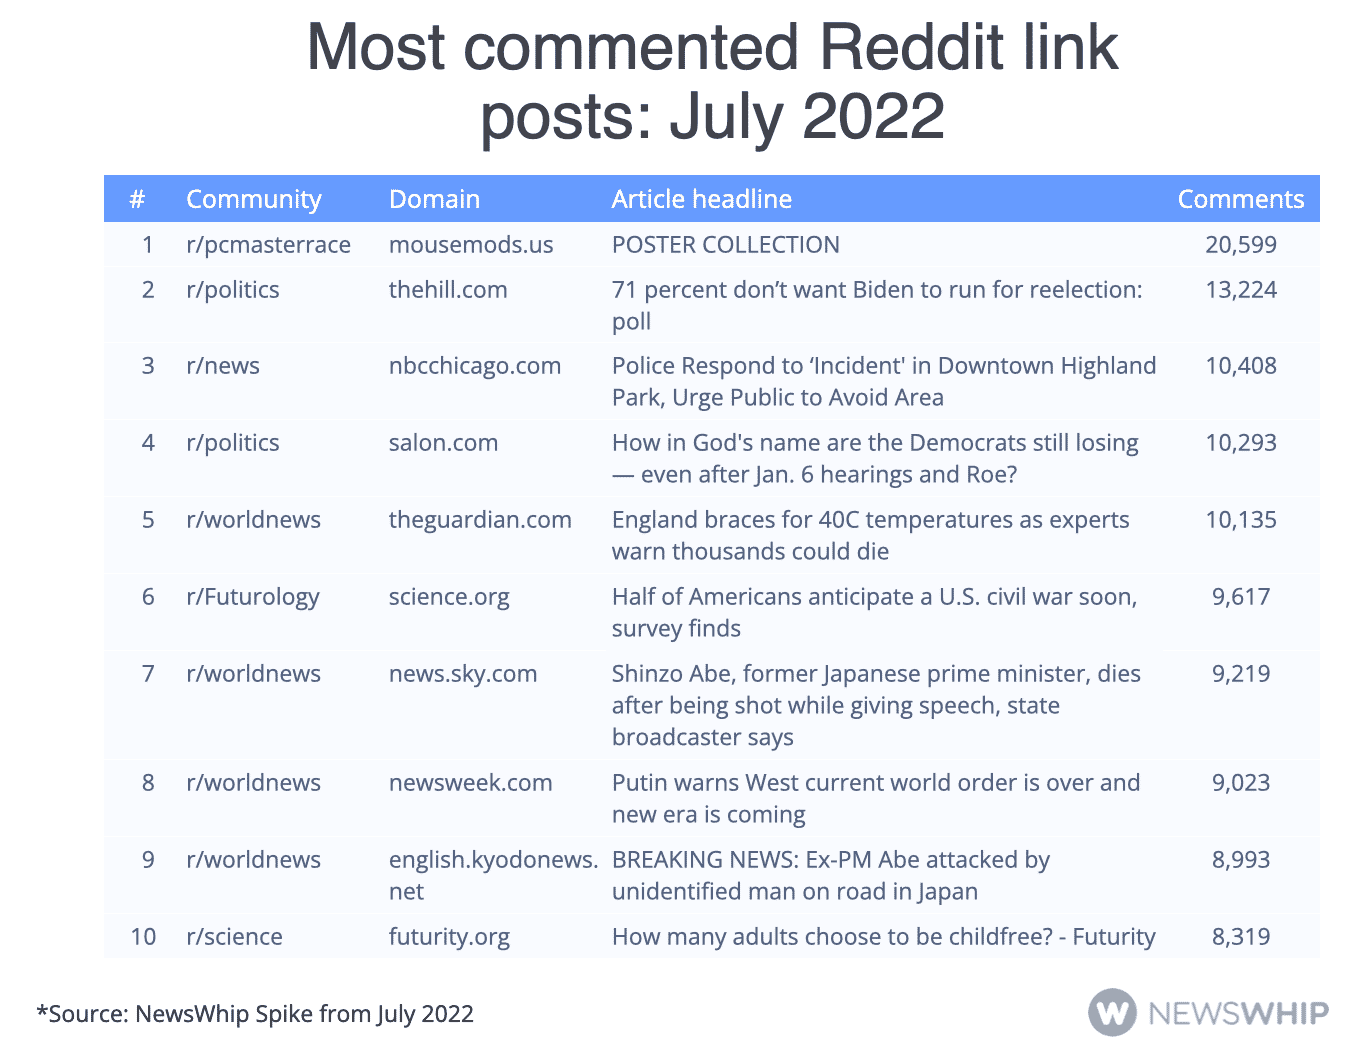 Table showing the most commented Reddit link posts in July 2022, ranked by comments